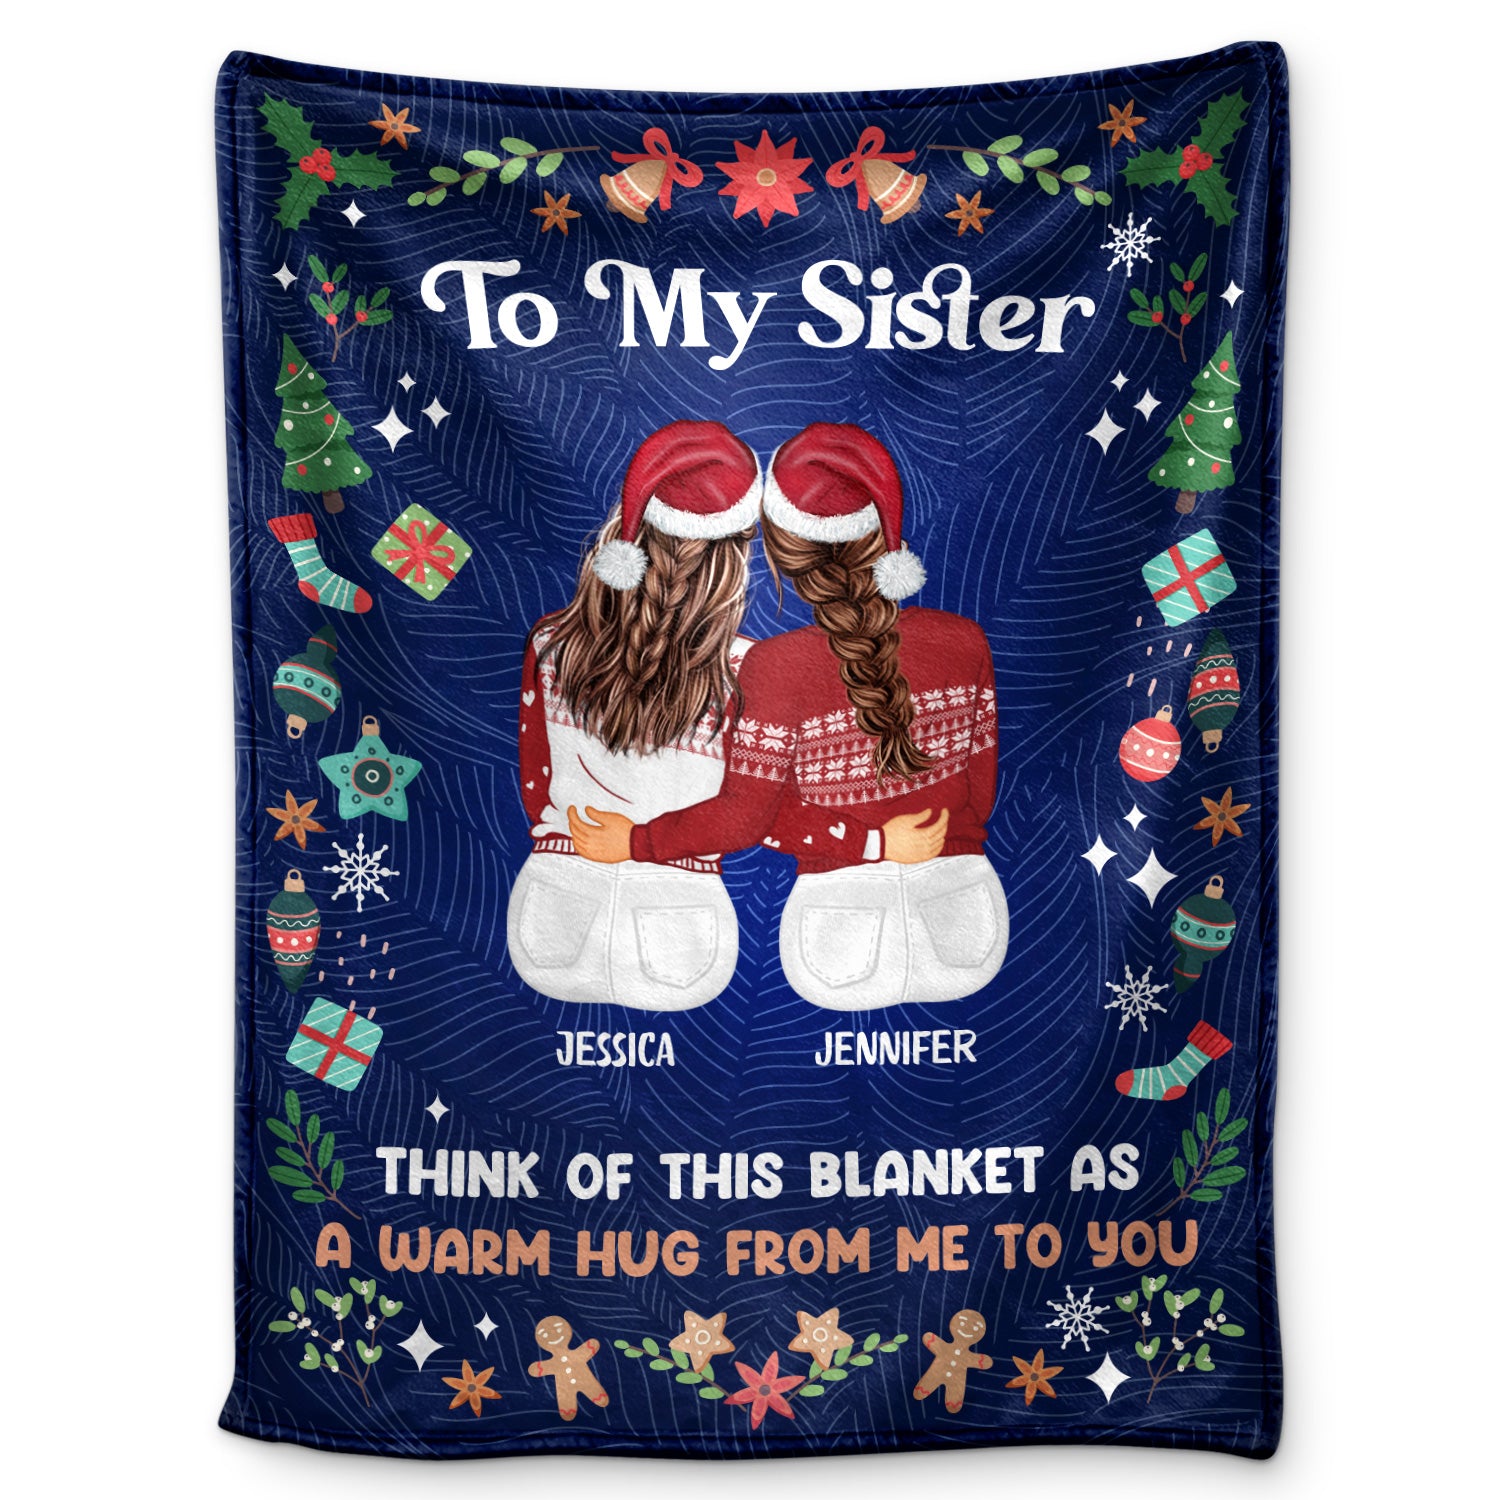 A Warm Hug From Me - Christmas Gift For Sisters And Best Friends - Personalized Fleece Blanket